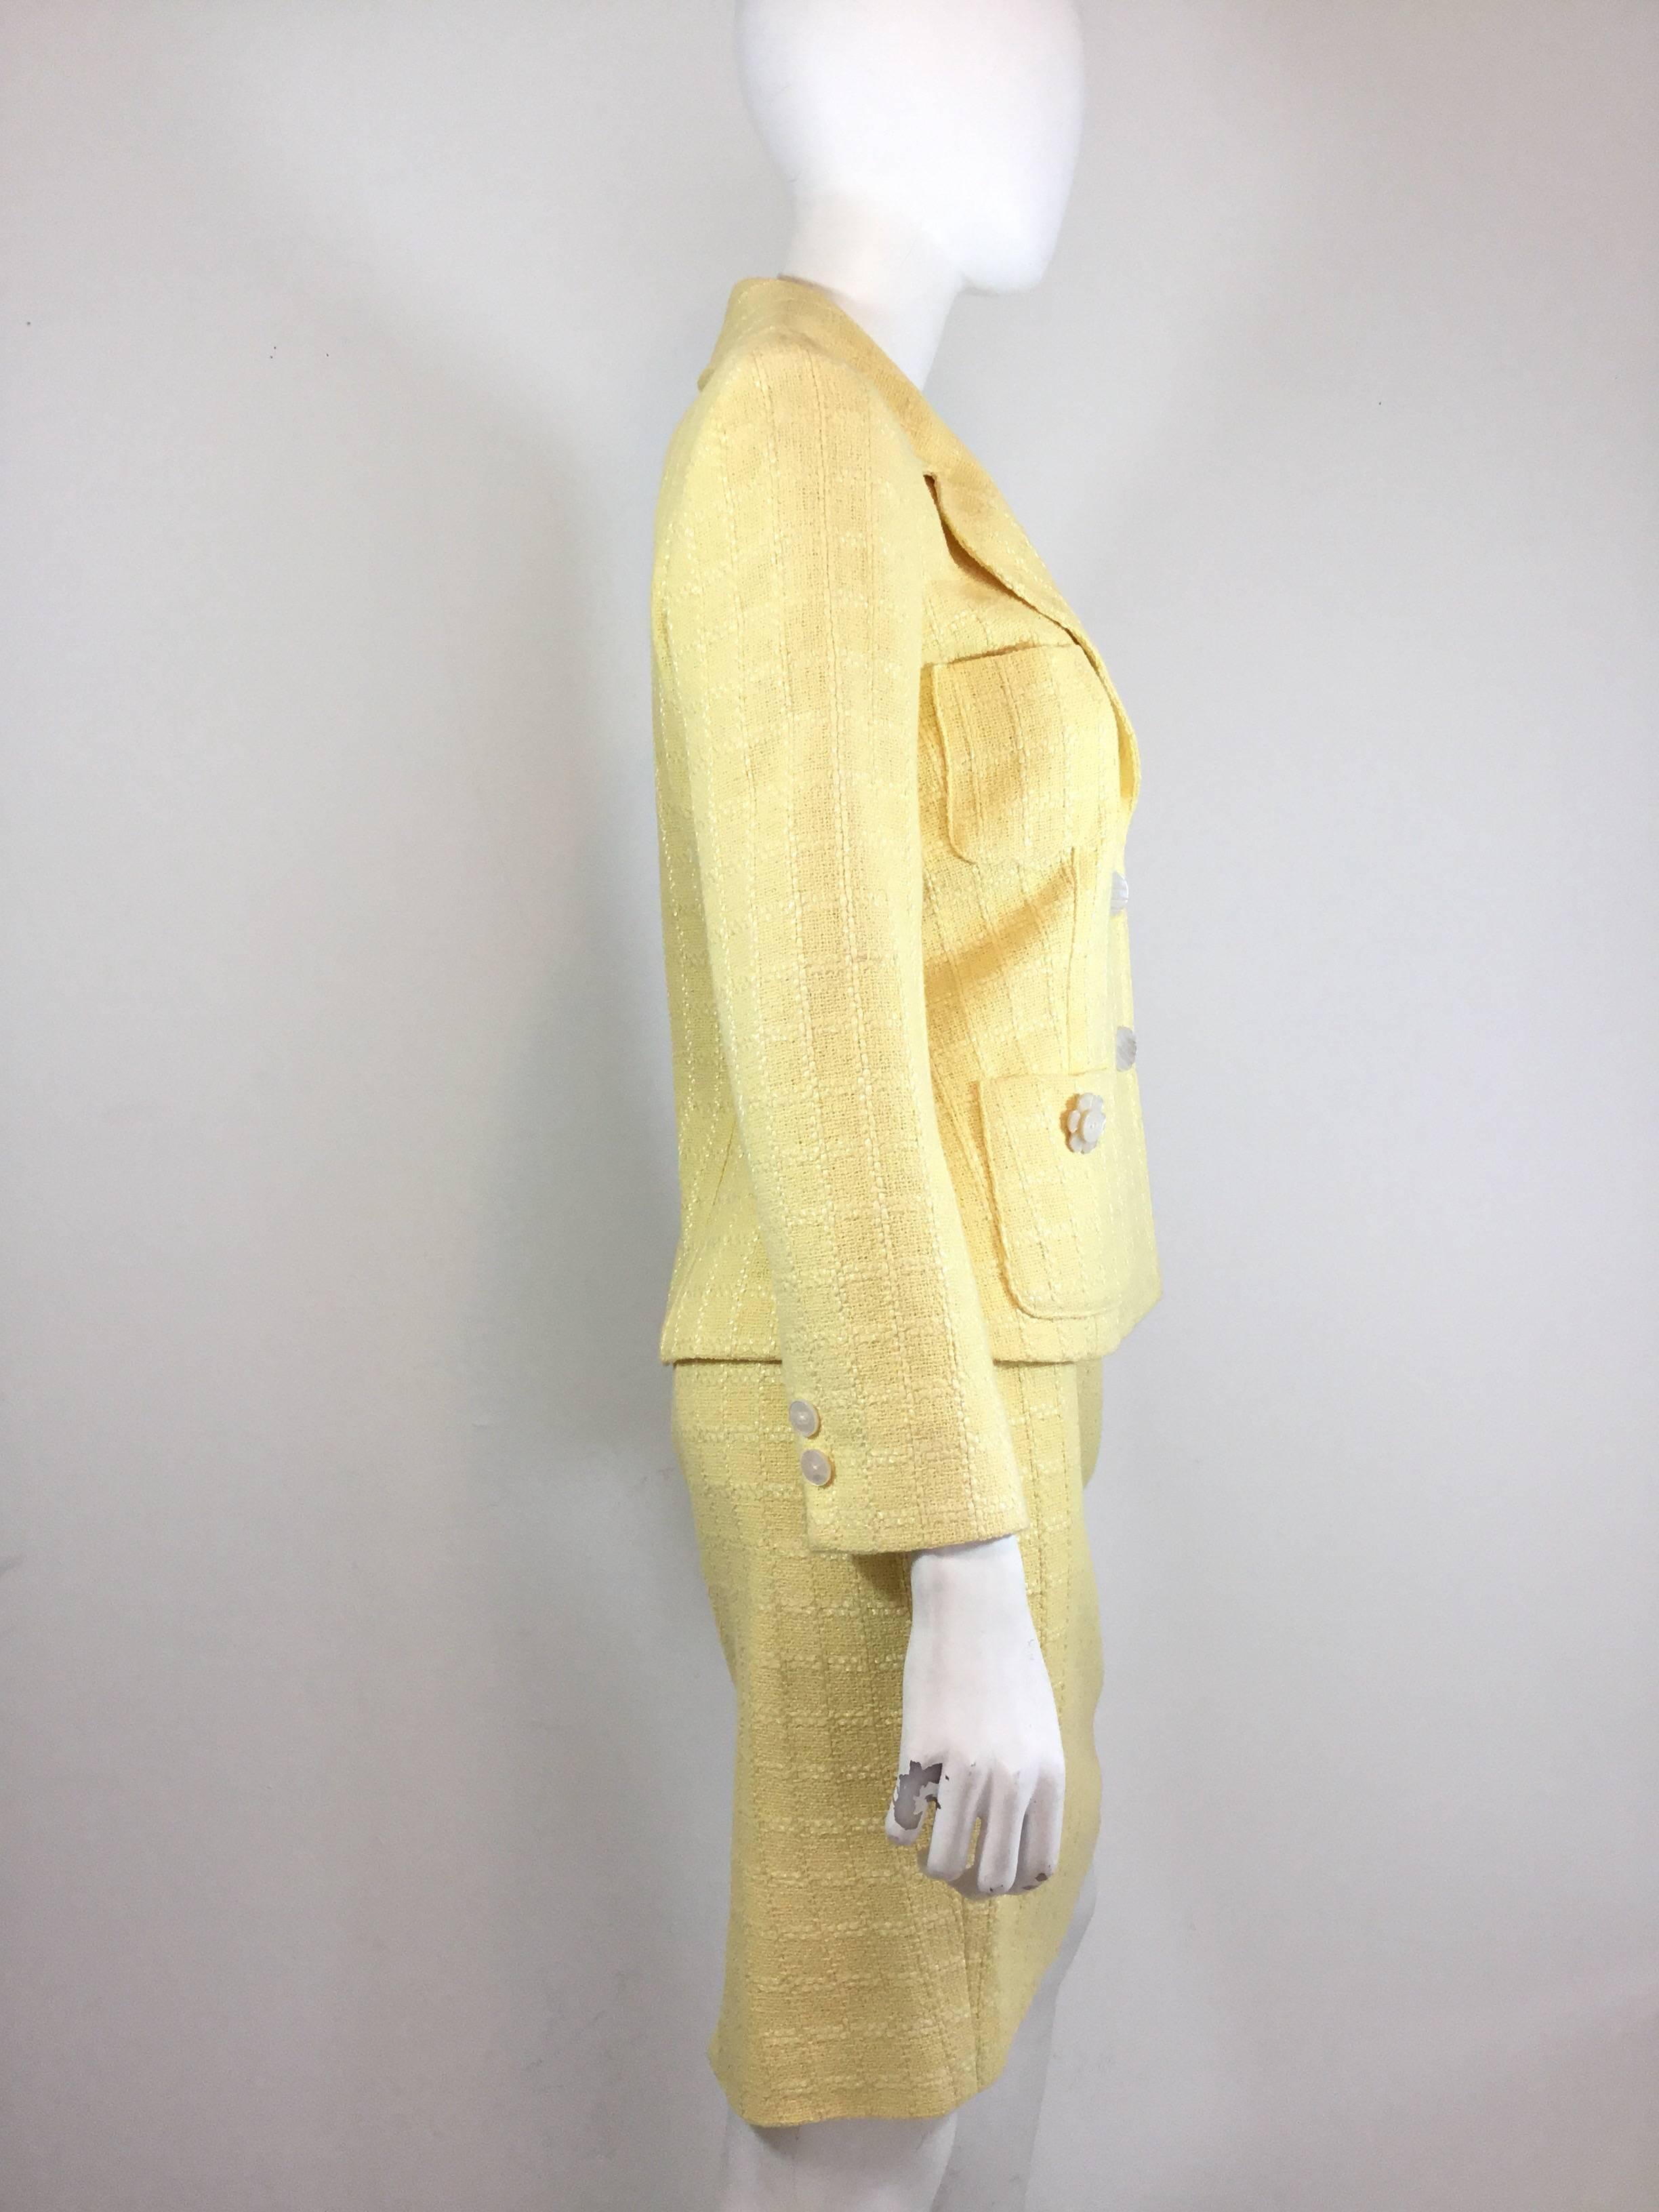 Chanel skirt suit featured in yellow. Jacket has button closures at the front and has a total 4 pockets. Skirt has a back zipper closure and is fully lined. Labeled size 38, made in France.

Jacket- 36”, sleeves 23”, length 25”
Skirt- waist 26”,